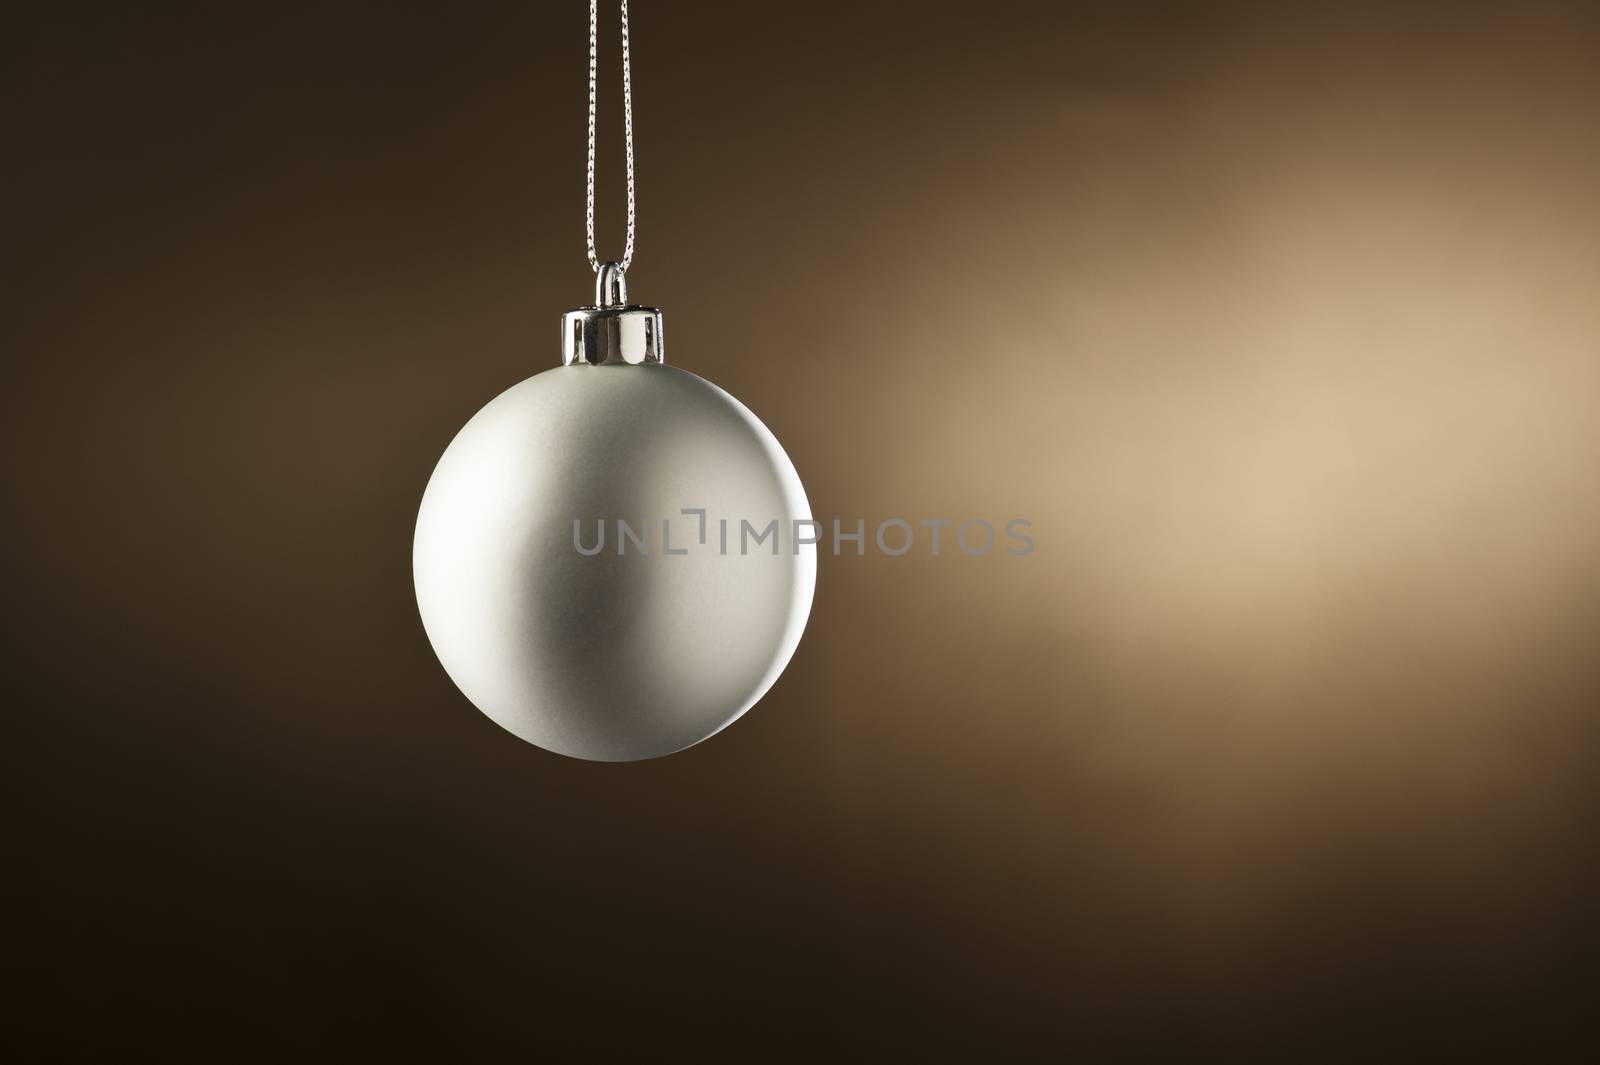 Christmas Bauble in simple color setting and side lighting